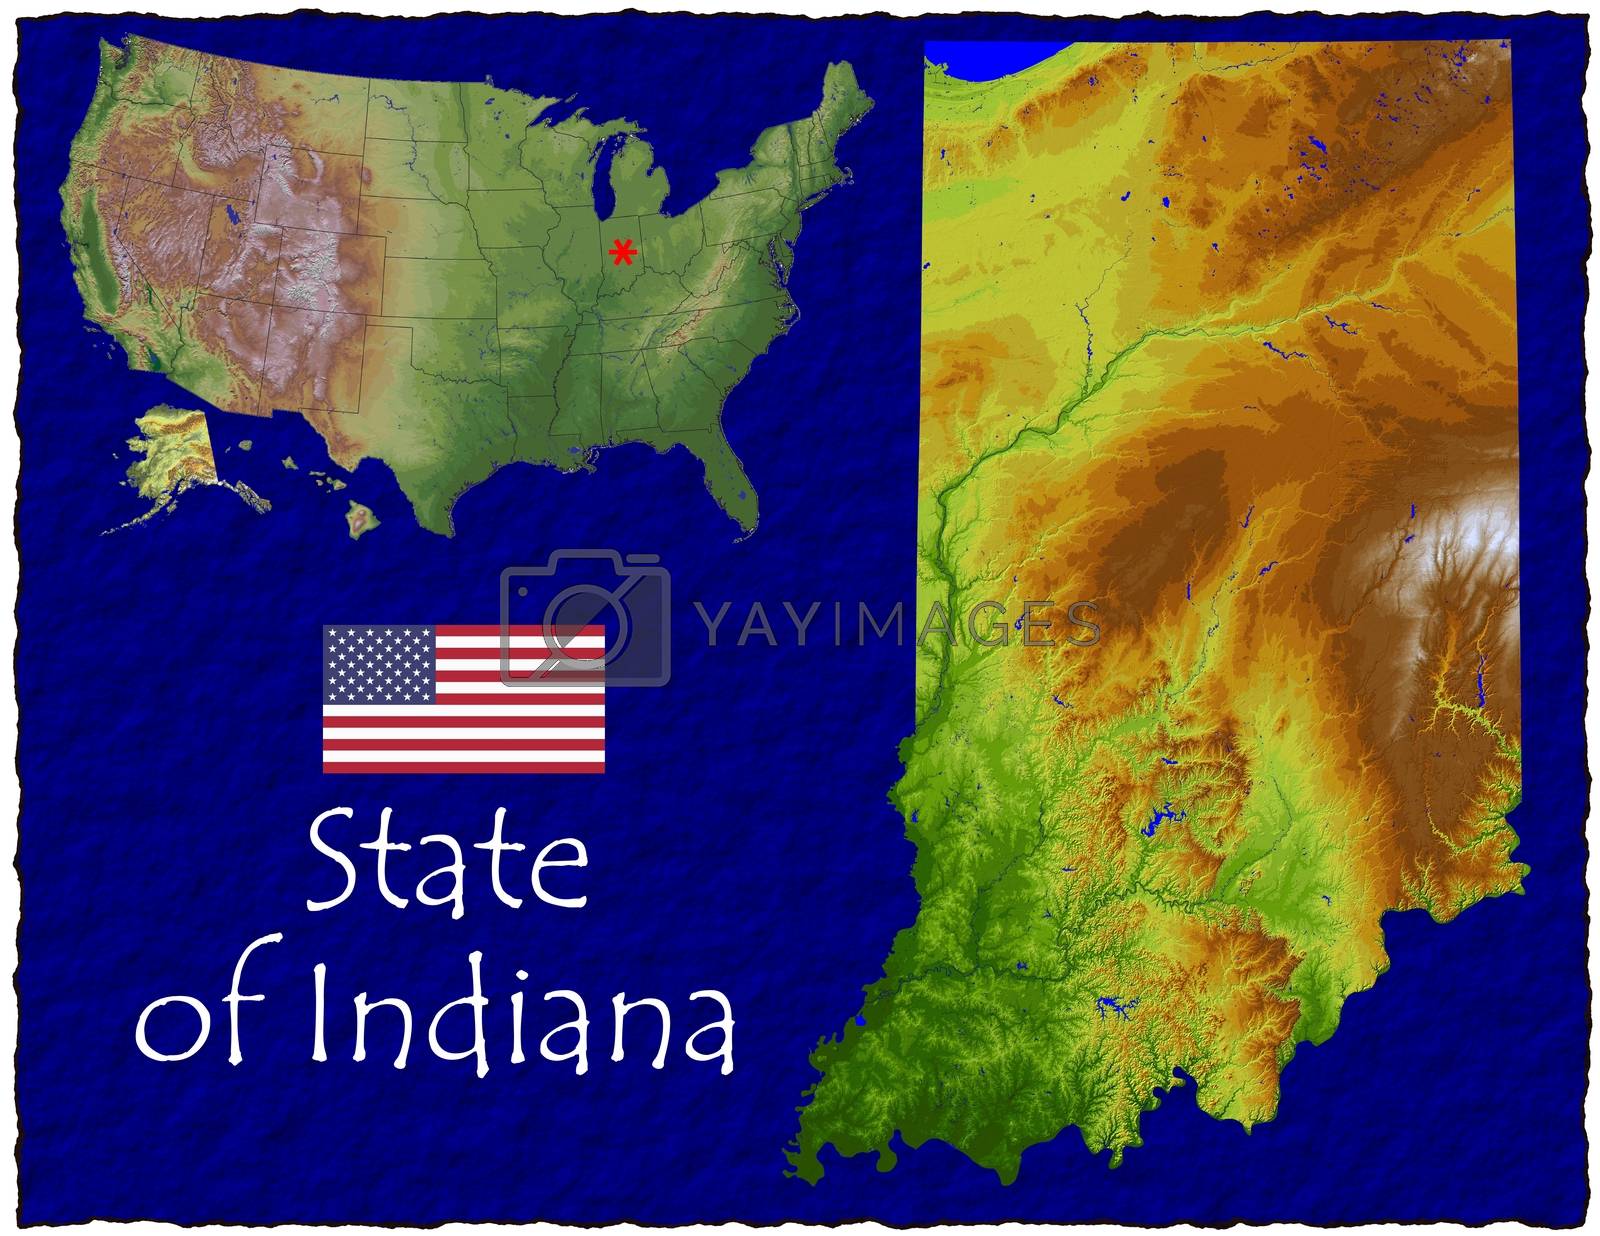 Royalty free image of State of Indiana by JRTBurr